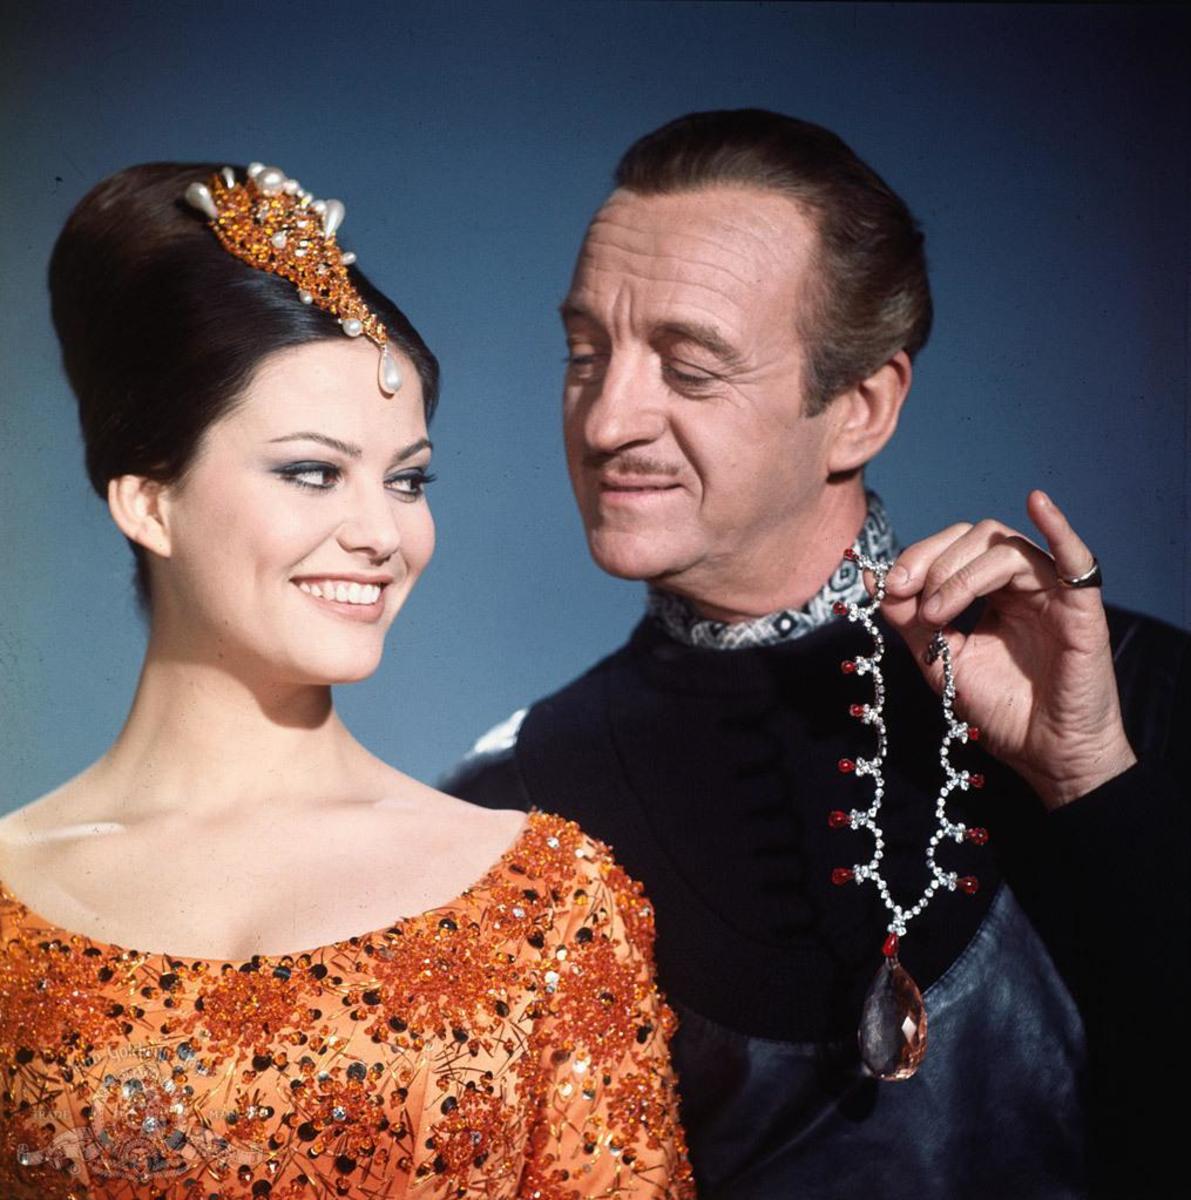 Niven (right) is perfectly cast as gentleman thief The Phantom in a role that only he could possibly play.